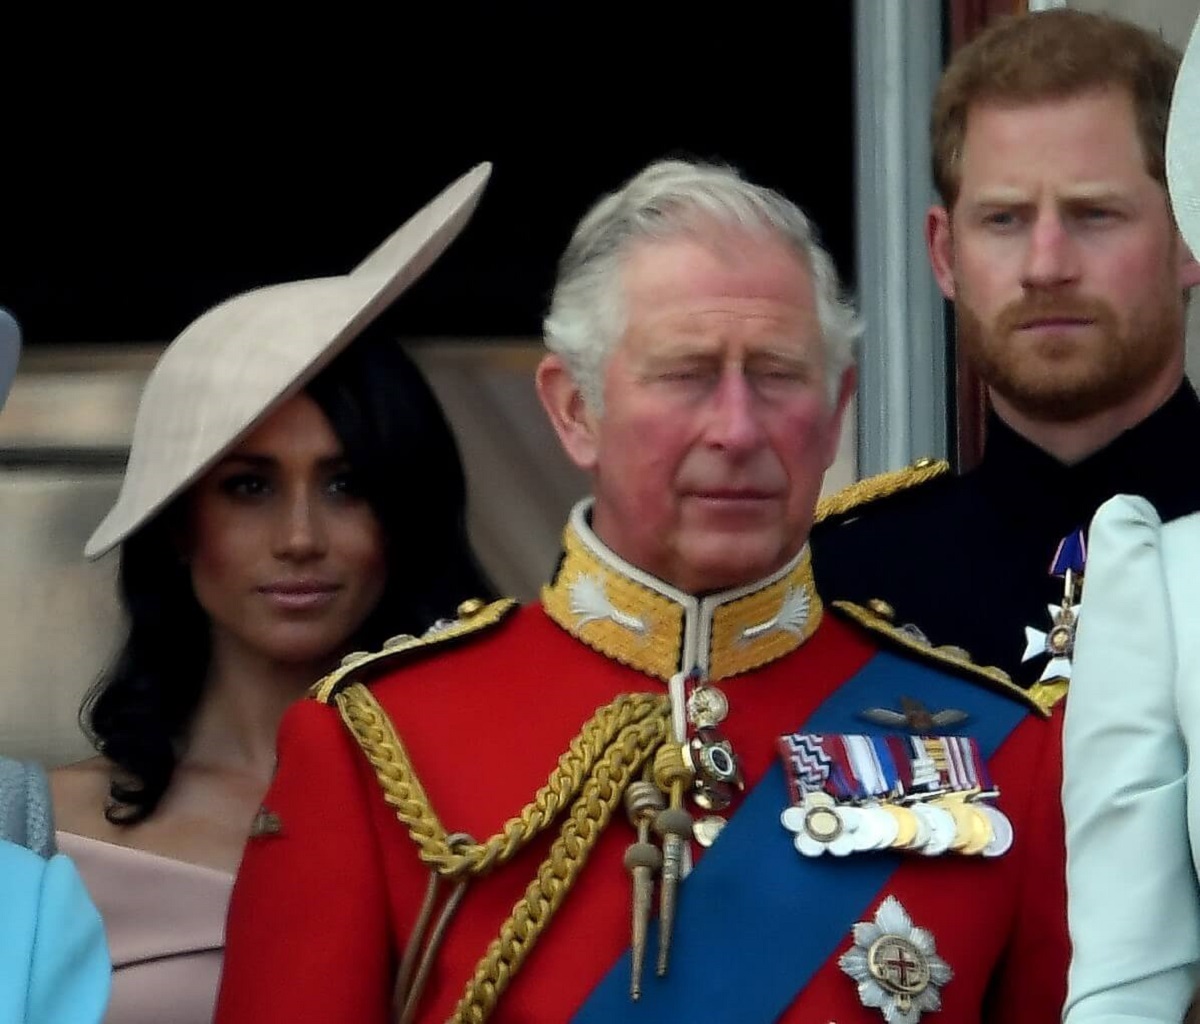 Now-King Charles III who has declared an 'all out war' on Meghan Markle and Prince Harry, attending day 1 of Royal Ascot in 2018